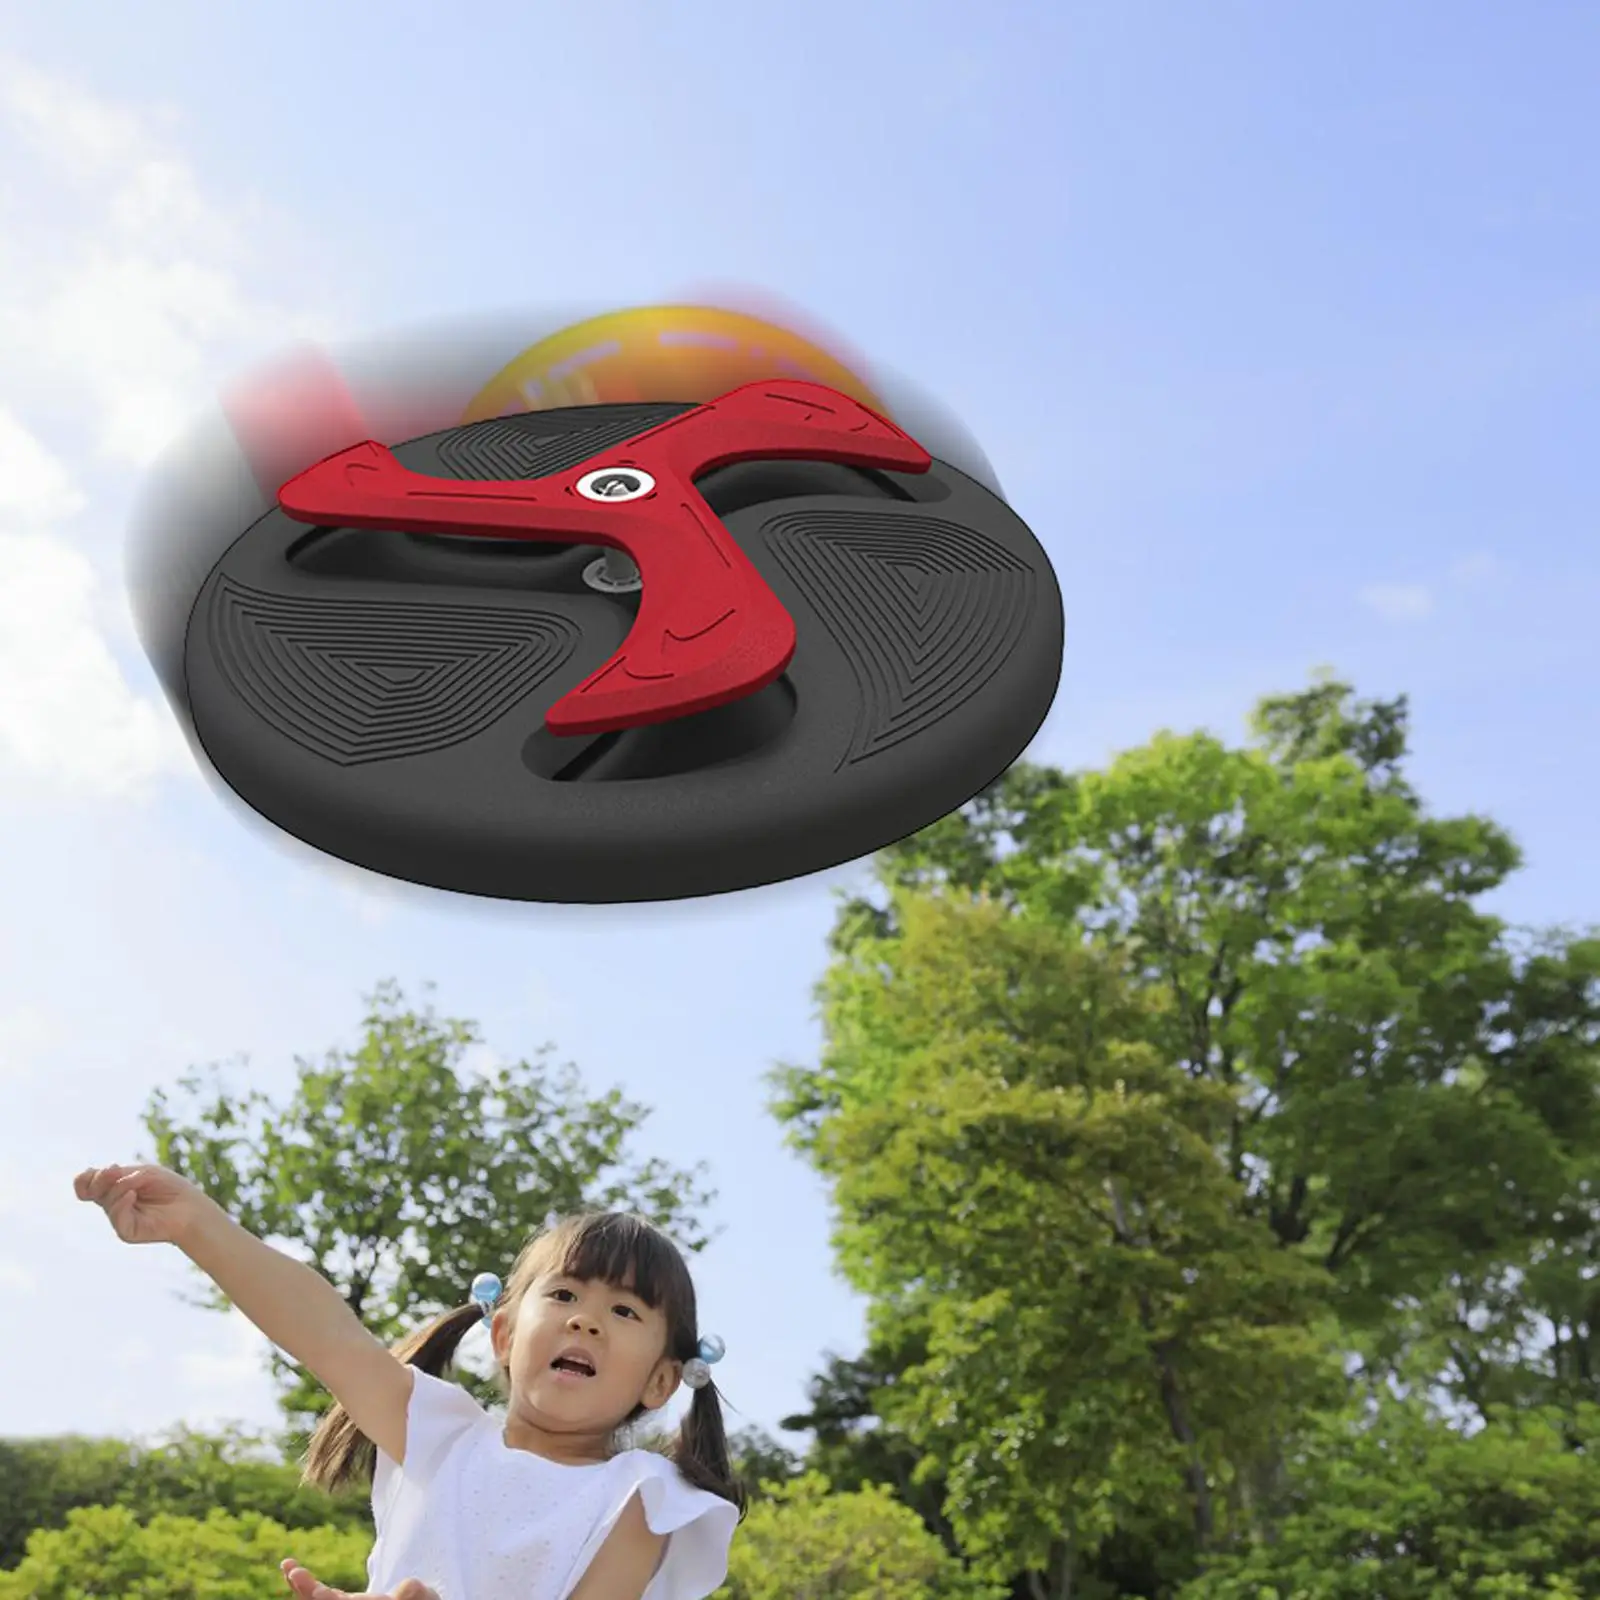 Kids Soft Flying Discs Flexible Flying of Saucer for Game Activities Family